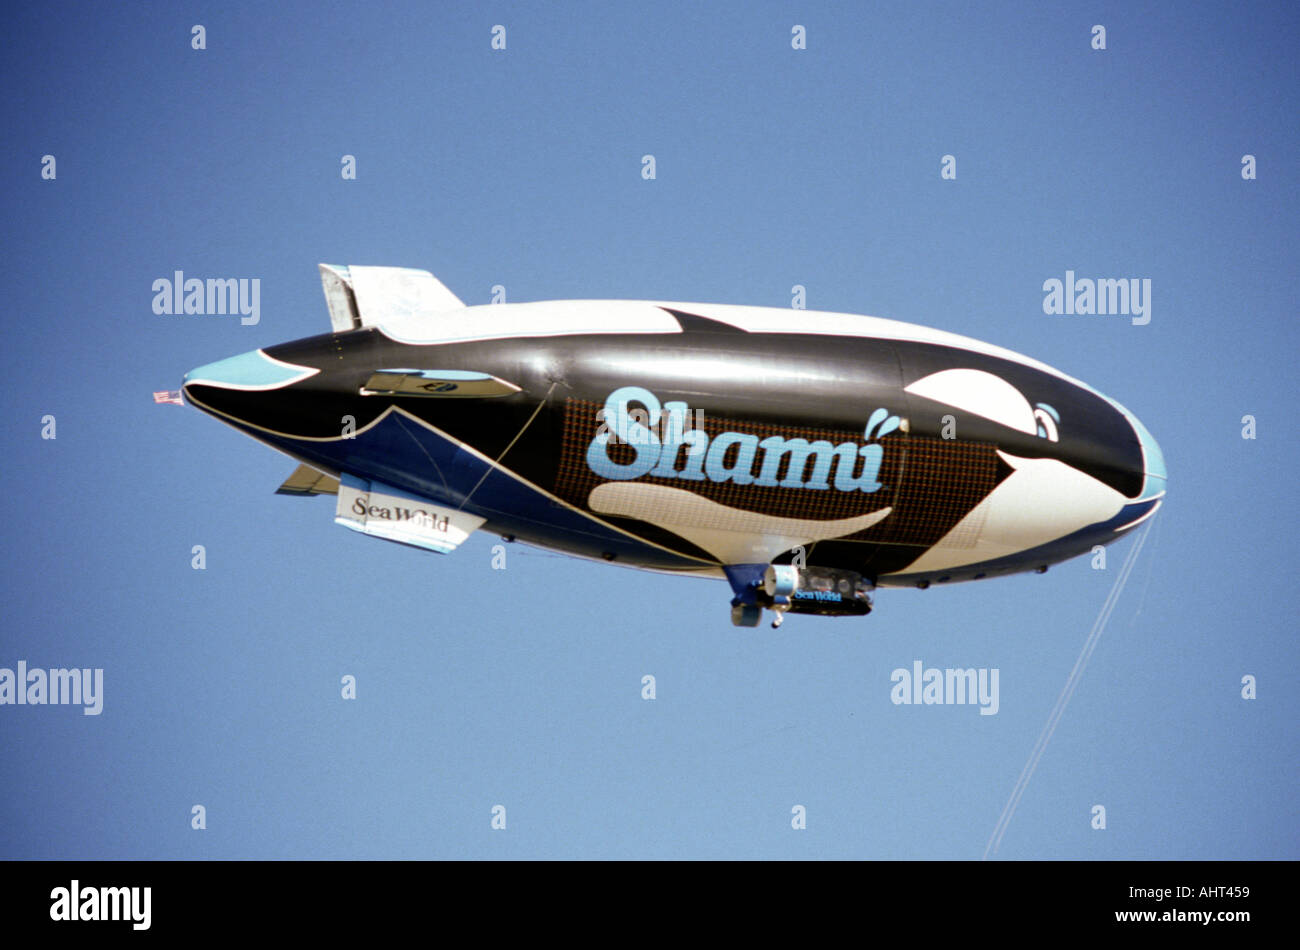 Example of Blimp or Airship from Sea World Florida Stock Photo